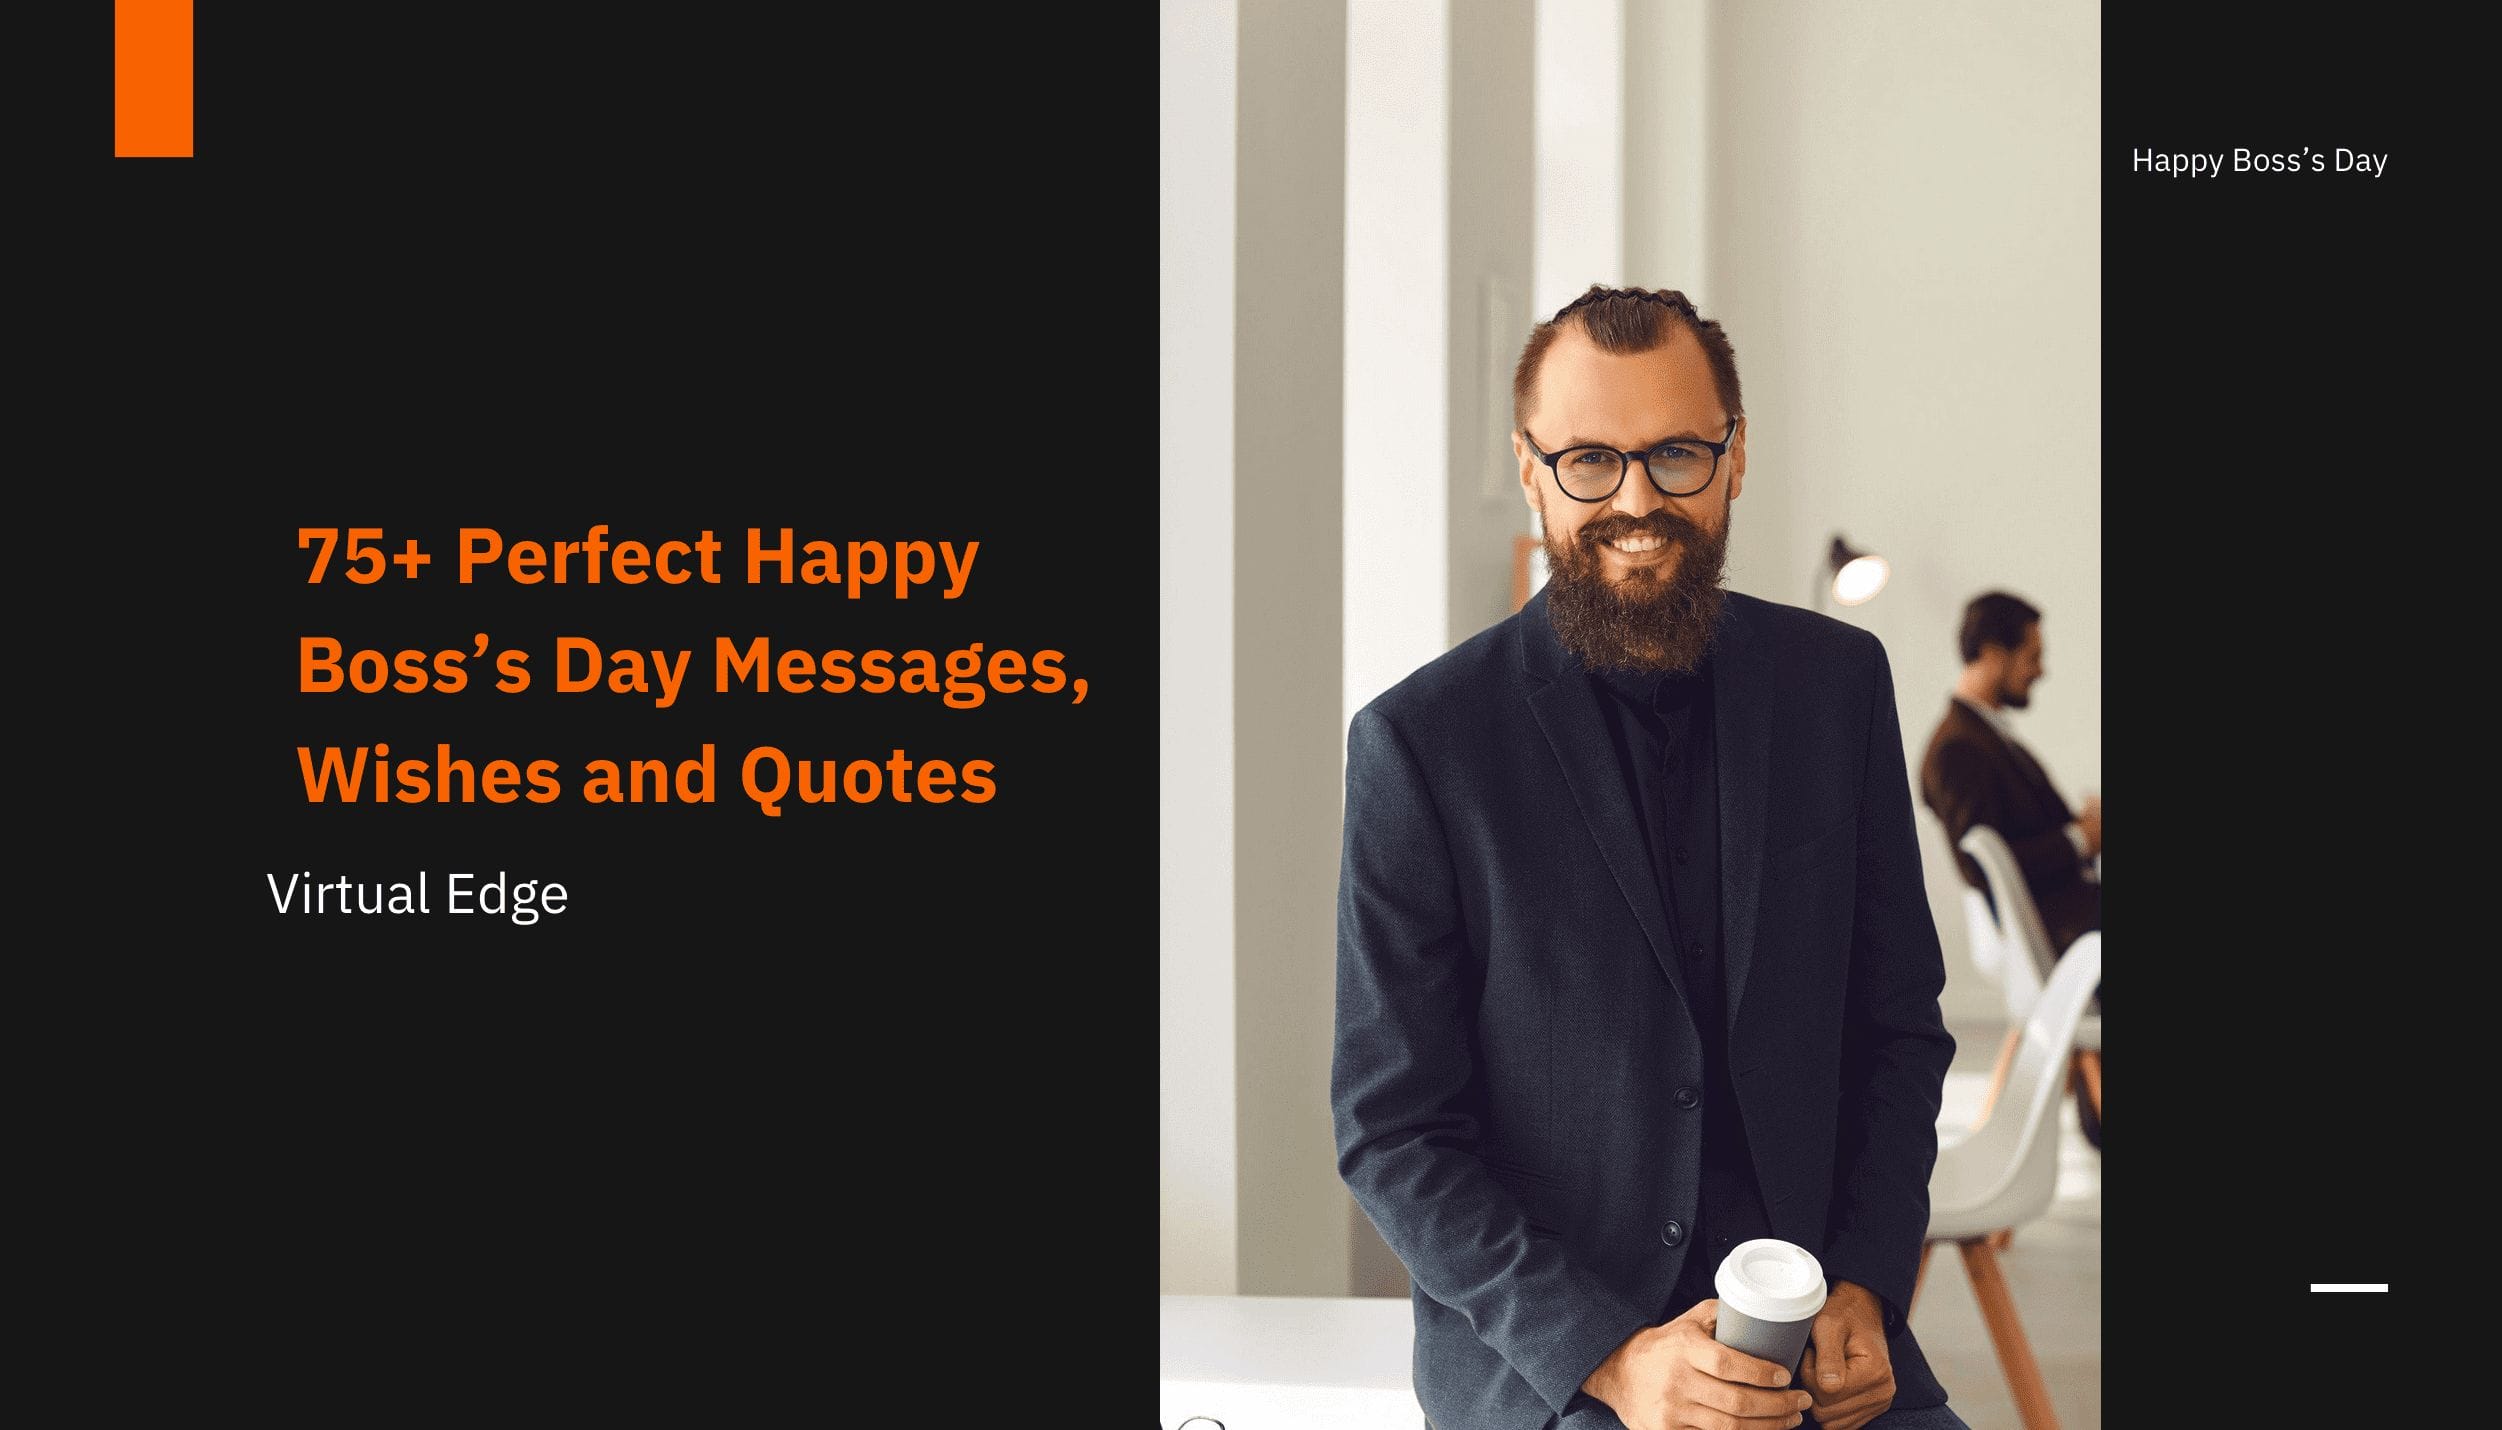 75+ Perfect Happy Boss’s Day Messages, Wishes and Quotes